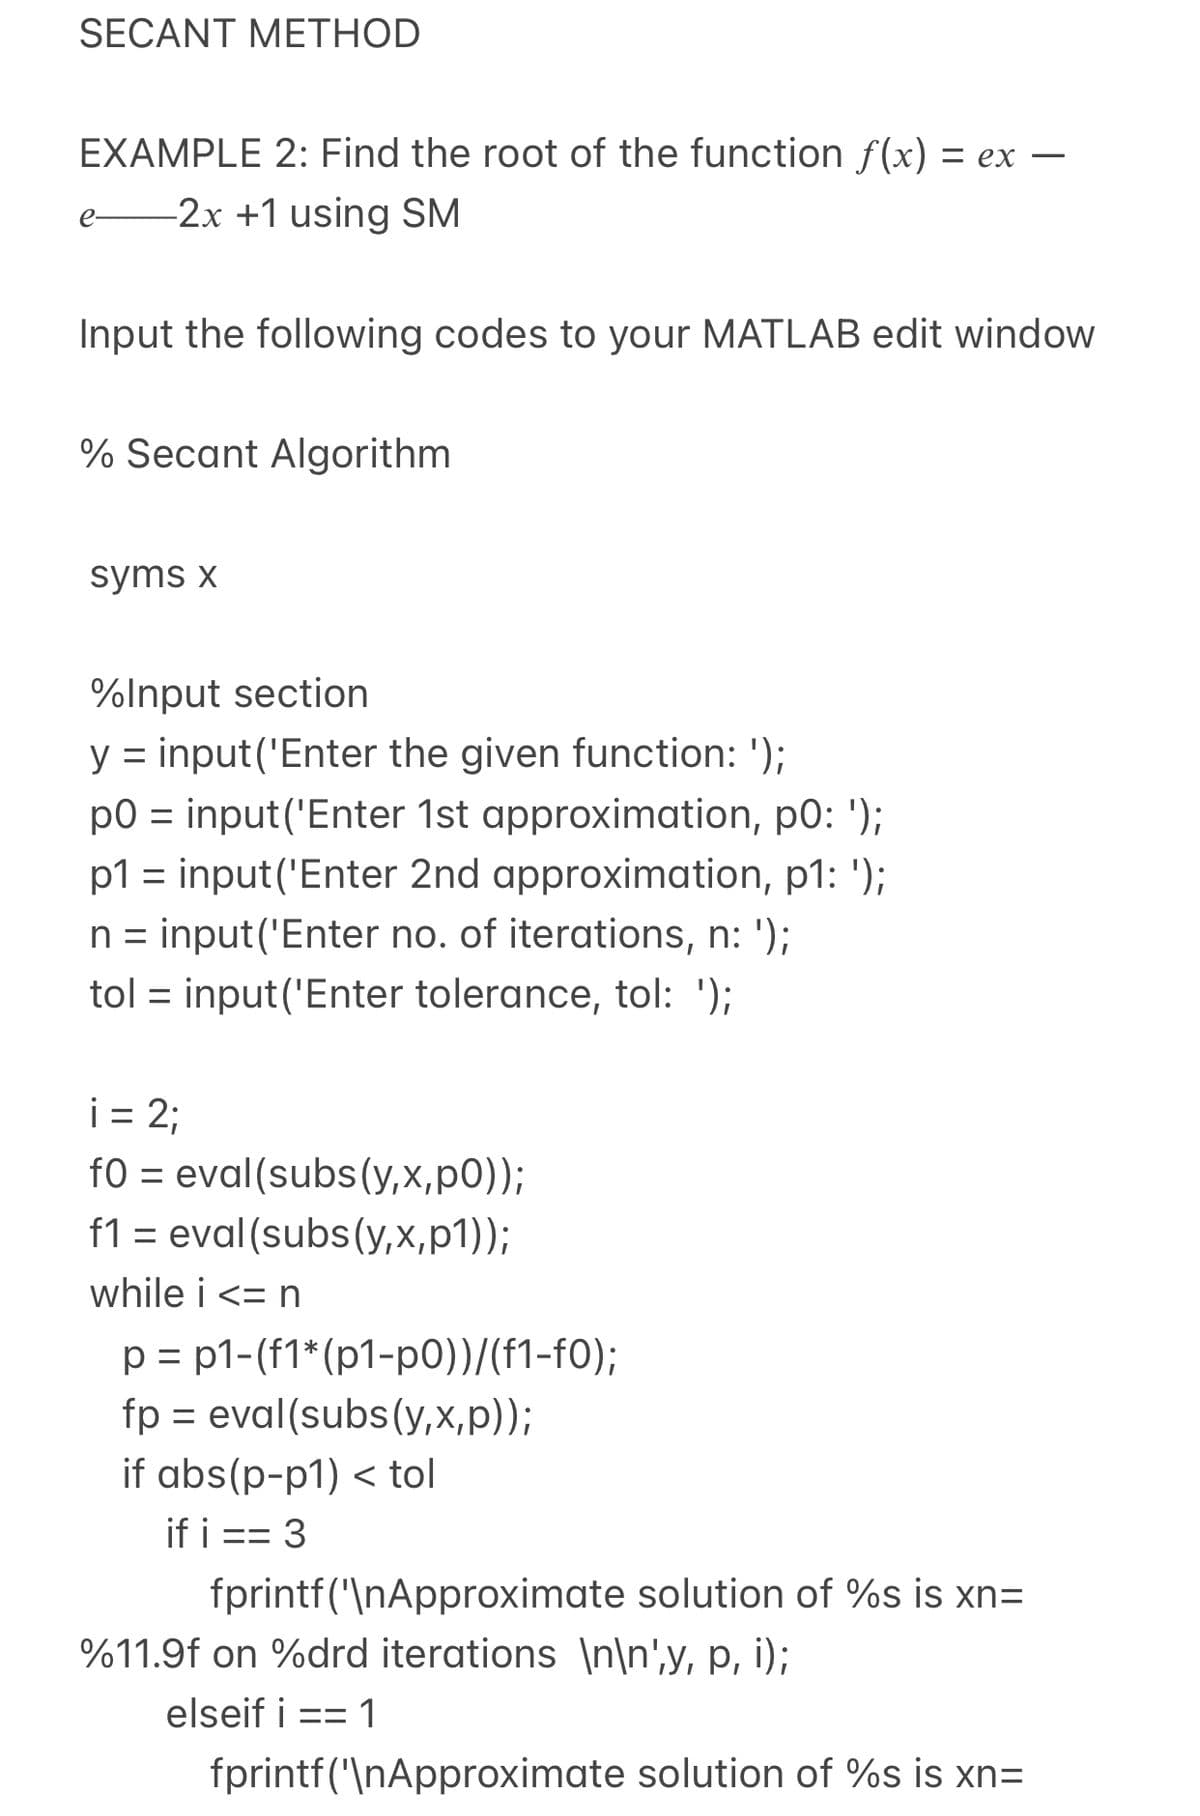 SECANT METHOD
EXAMPLE 2: Find the root of the function f(x) = ex
-2x +1 using SM
e-
Input the following codes to your MATLAB edit window
% Secant Algorithm
syms x
%Input section
y = input('Enter the given function: ');
p0 = input('Enter 1st approximation, p0: ');
p1 = input('Enter 2nd approximation, p1: ');
n = input('Enter no. of iterations, n: ');
tol = input('Enter tolerance, tol: ');
i = 2;
fO = eval(subs(y,x,p0));
f1 = eval(subs(y,x,p1));
while i <= n
p = p1-(f1* (p1-p0))/(f1-f0);
fp = eval(subs(y,x,p));
if abs(p-p1) < tol
if i == 3
ニニ
fprintf('\nApproximate solution of %s is xn=
%11.9f on %drd iterations \n\n',y, p, i);
elseif i
==
fprintf('\nApproximate solution of %s is xn=
